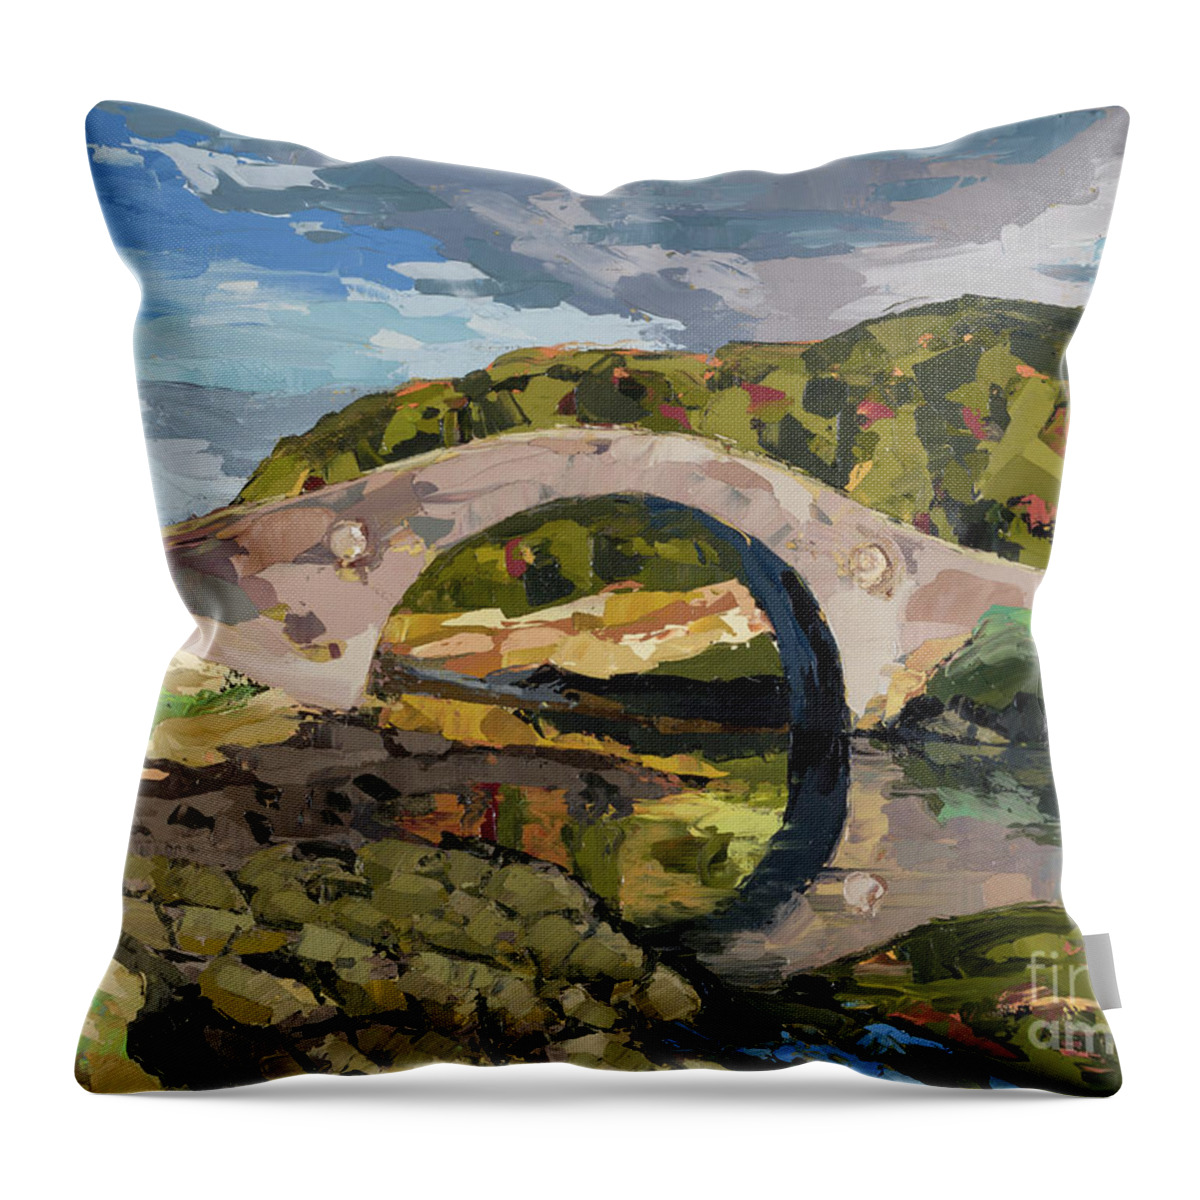 Scotland Throw Pillow featuring the painting Abandoned Bridge, 2015 by PJ Kirk